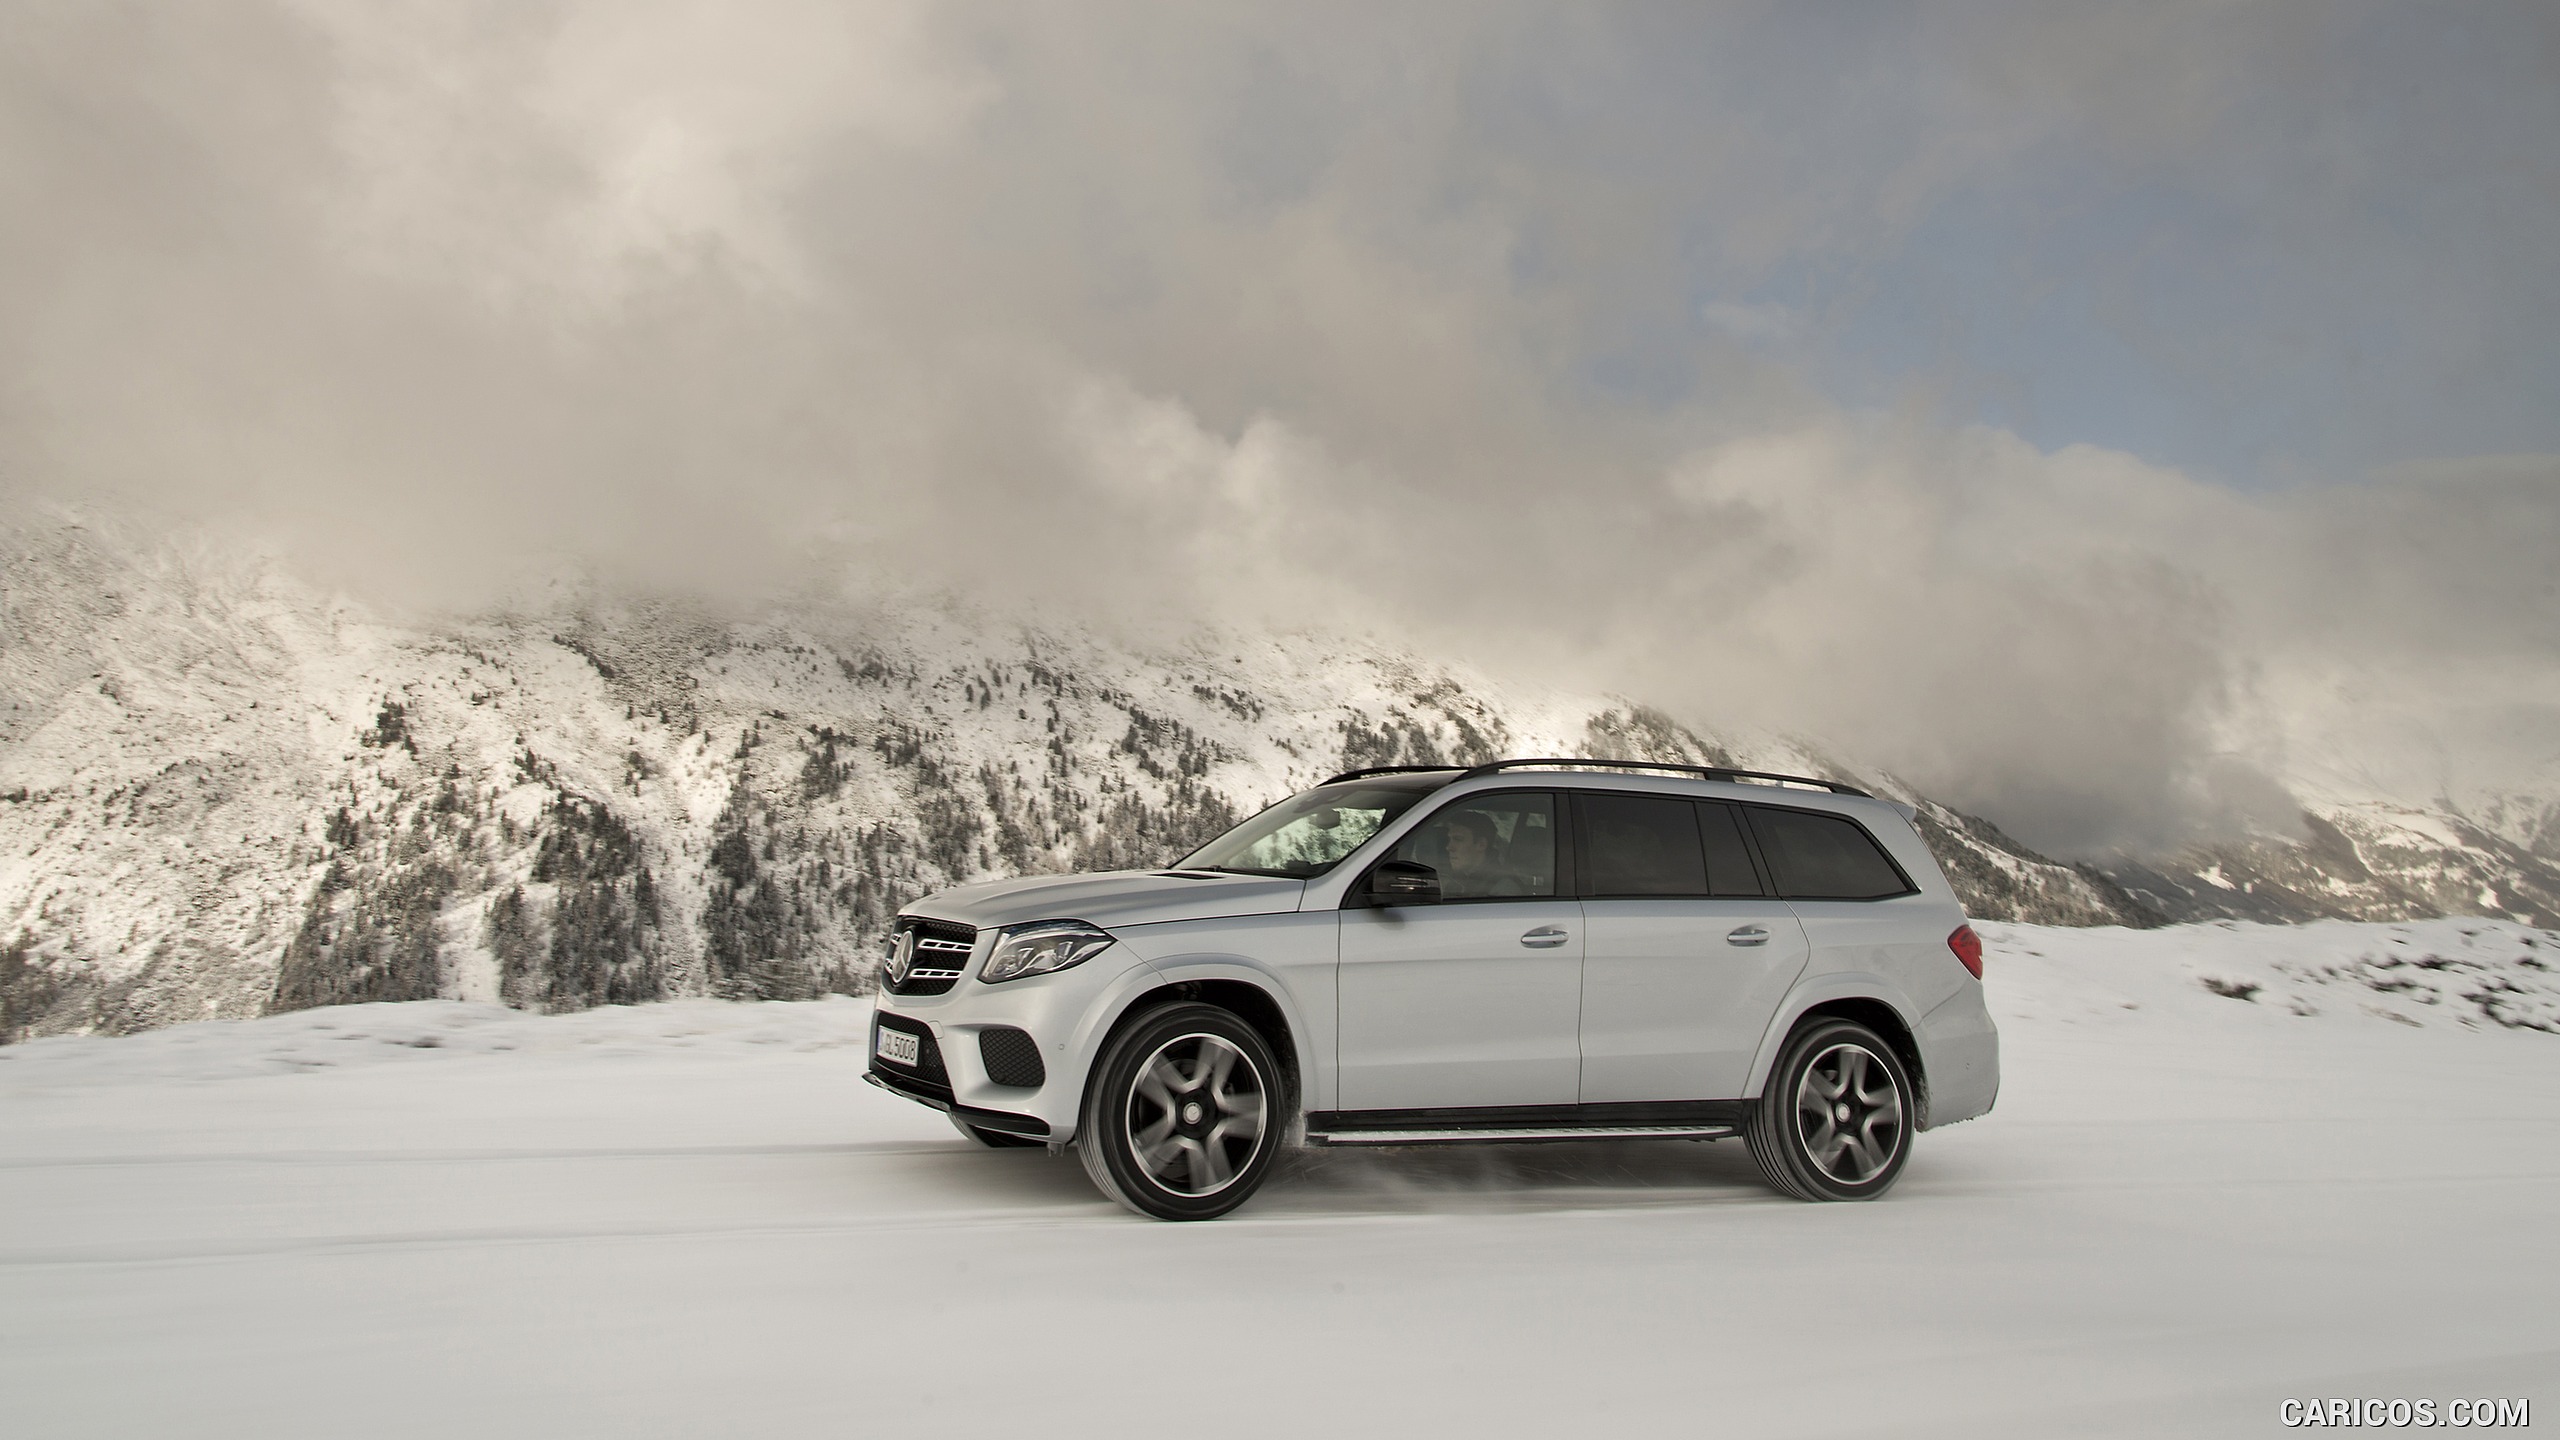 2017 Mercedes-Benz GLS 500 4MATIC AMG Line in Snow - Side, #131 of 255